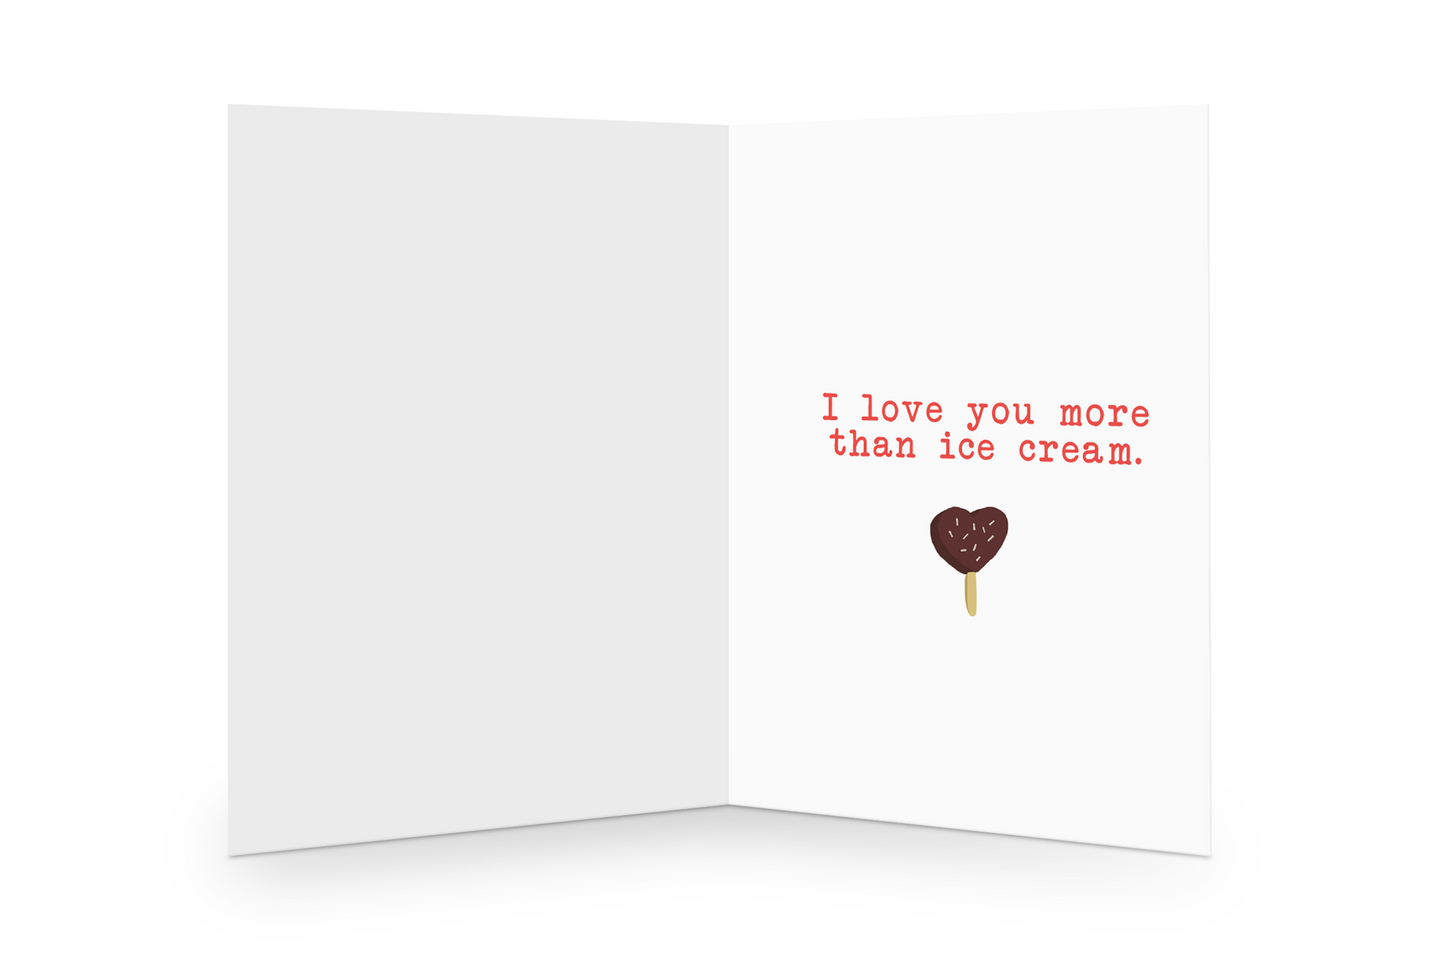 I love you more than ice cream inside greeting card